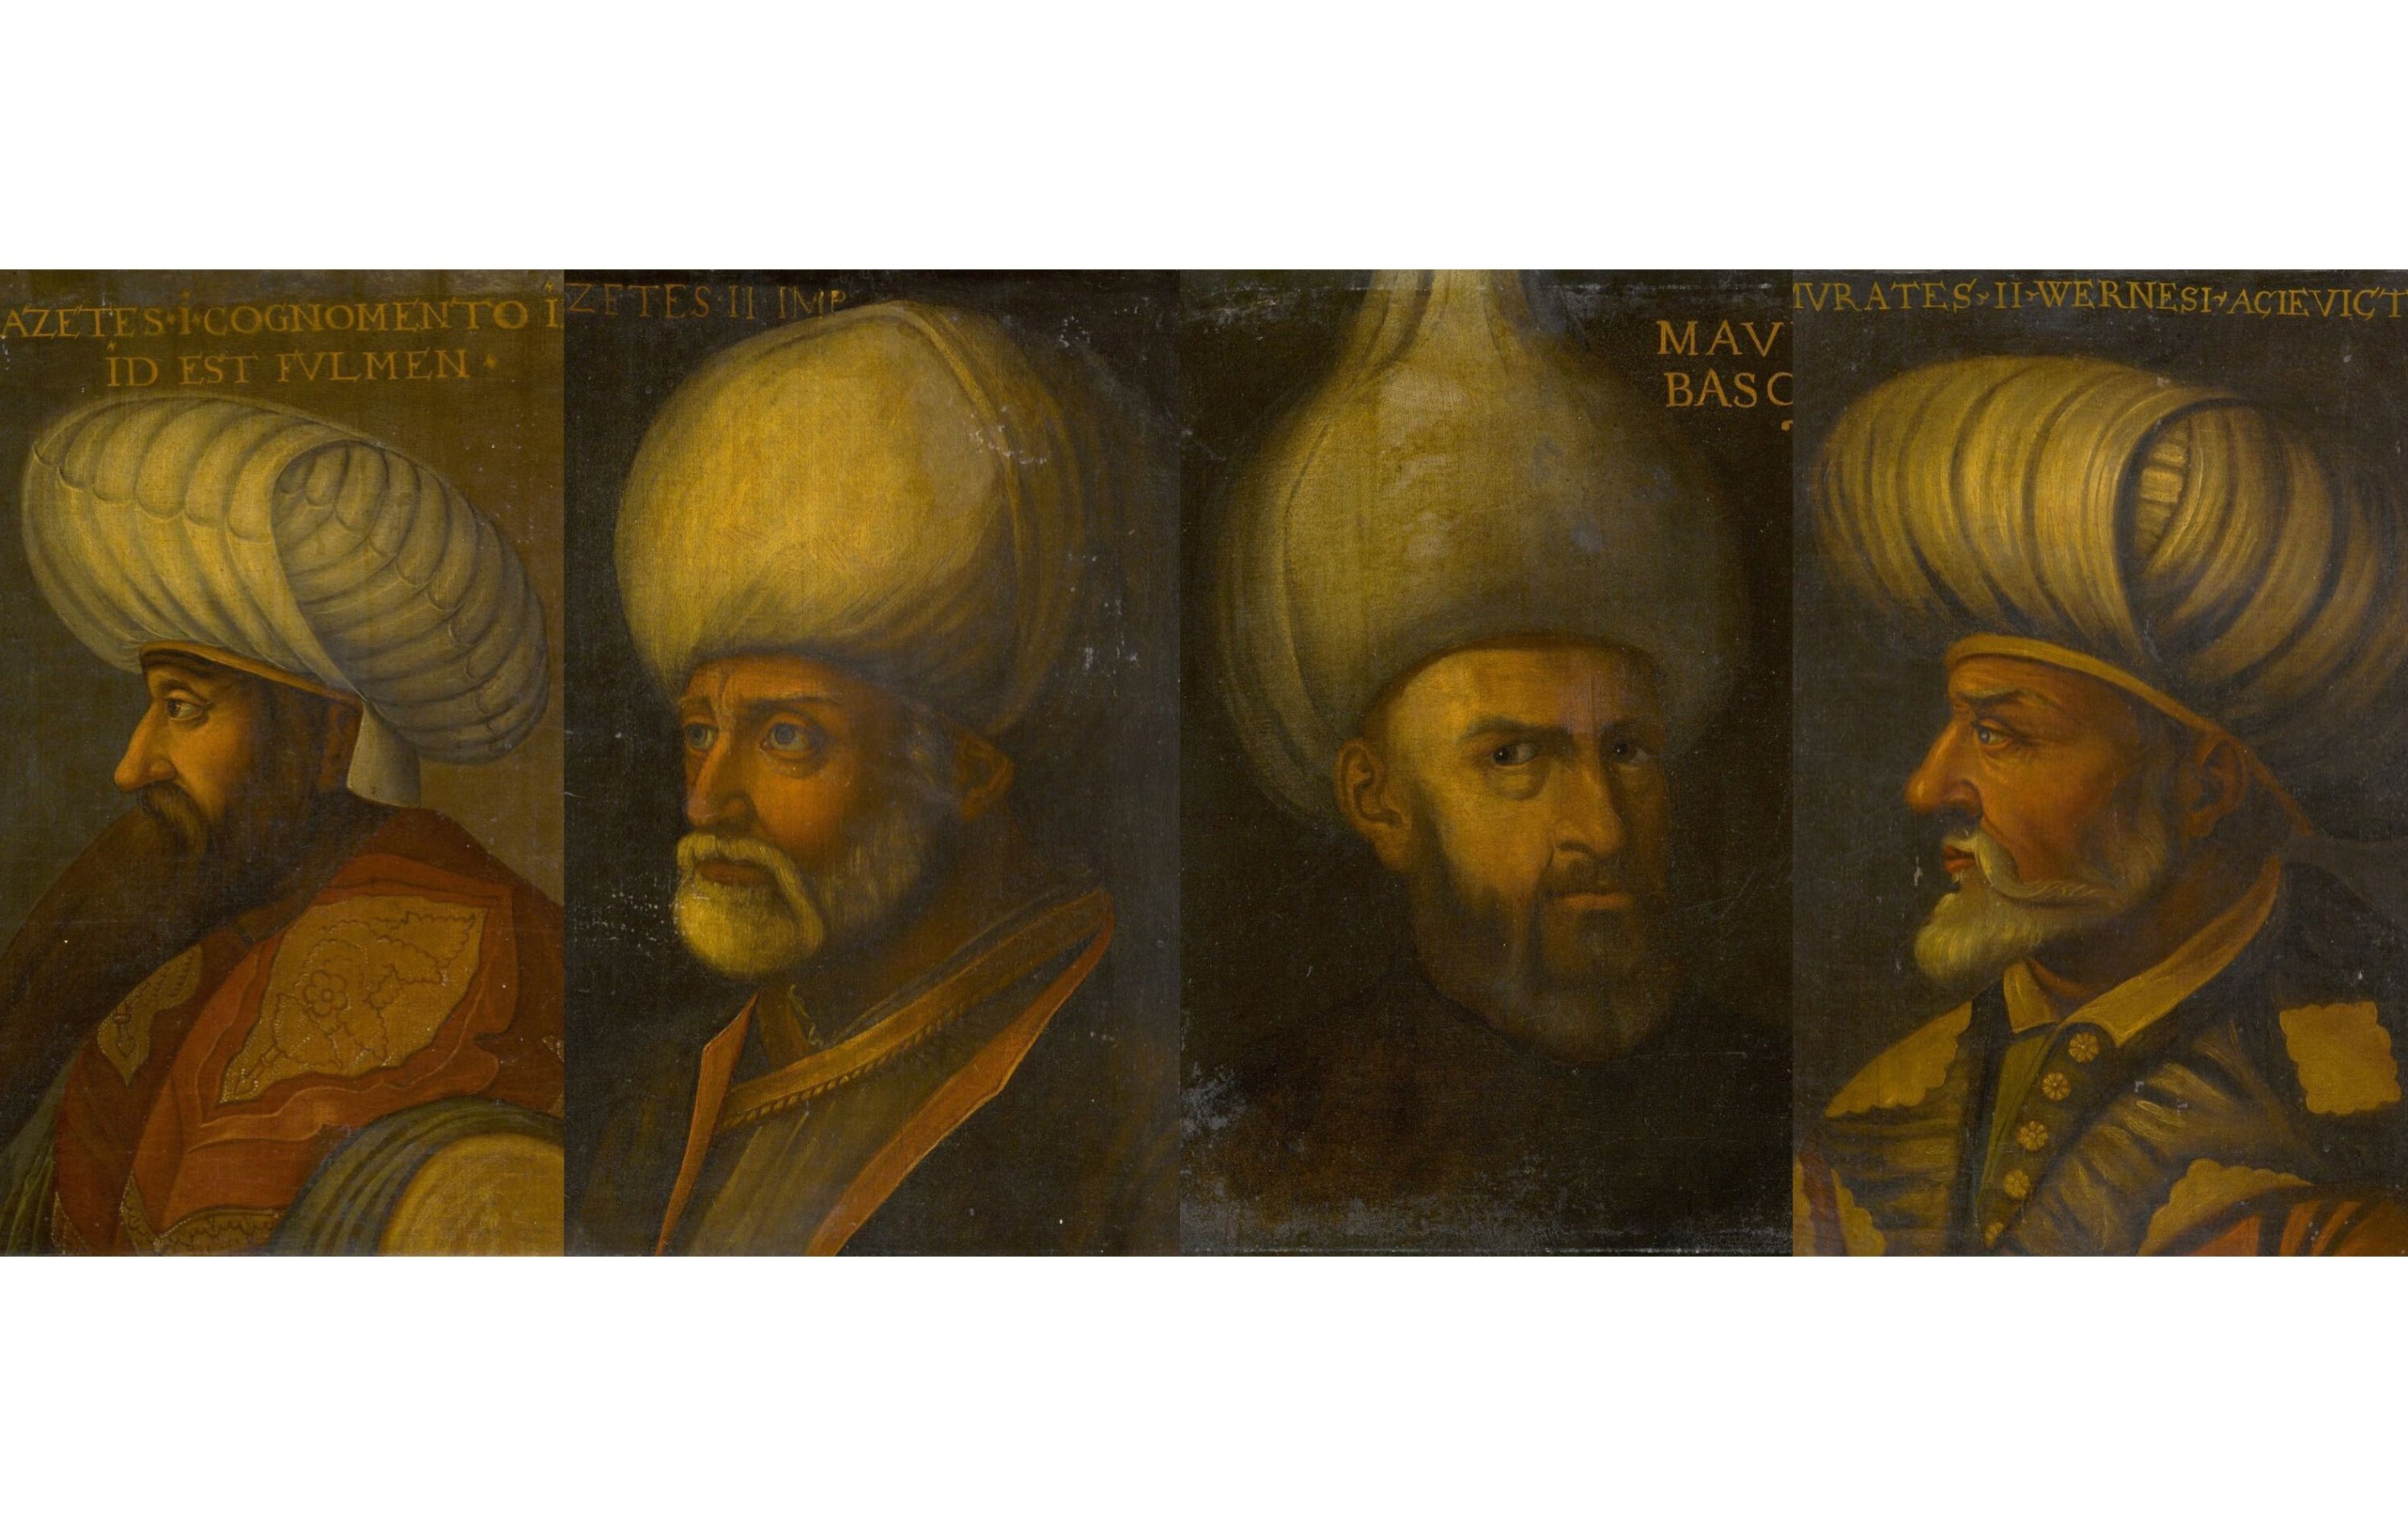 Portraits of Ottoman sultans auctioned off by Sotheby's, from left to right, Bayezid I, Bayezid II, Mehmed I and Murad II. (DHA)